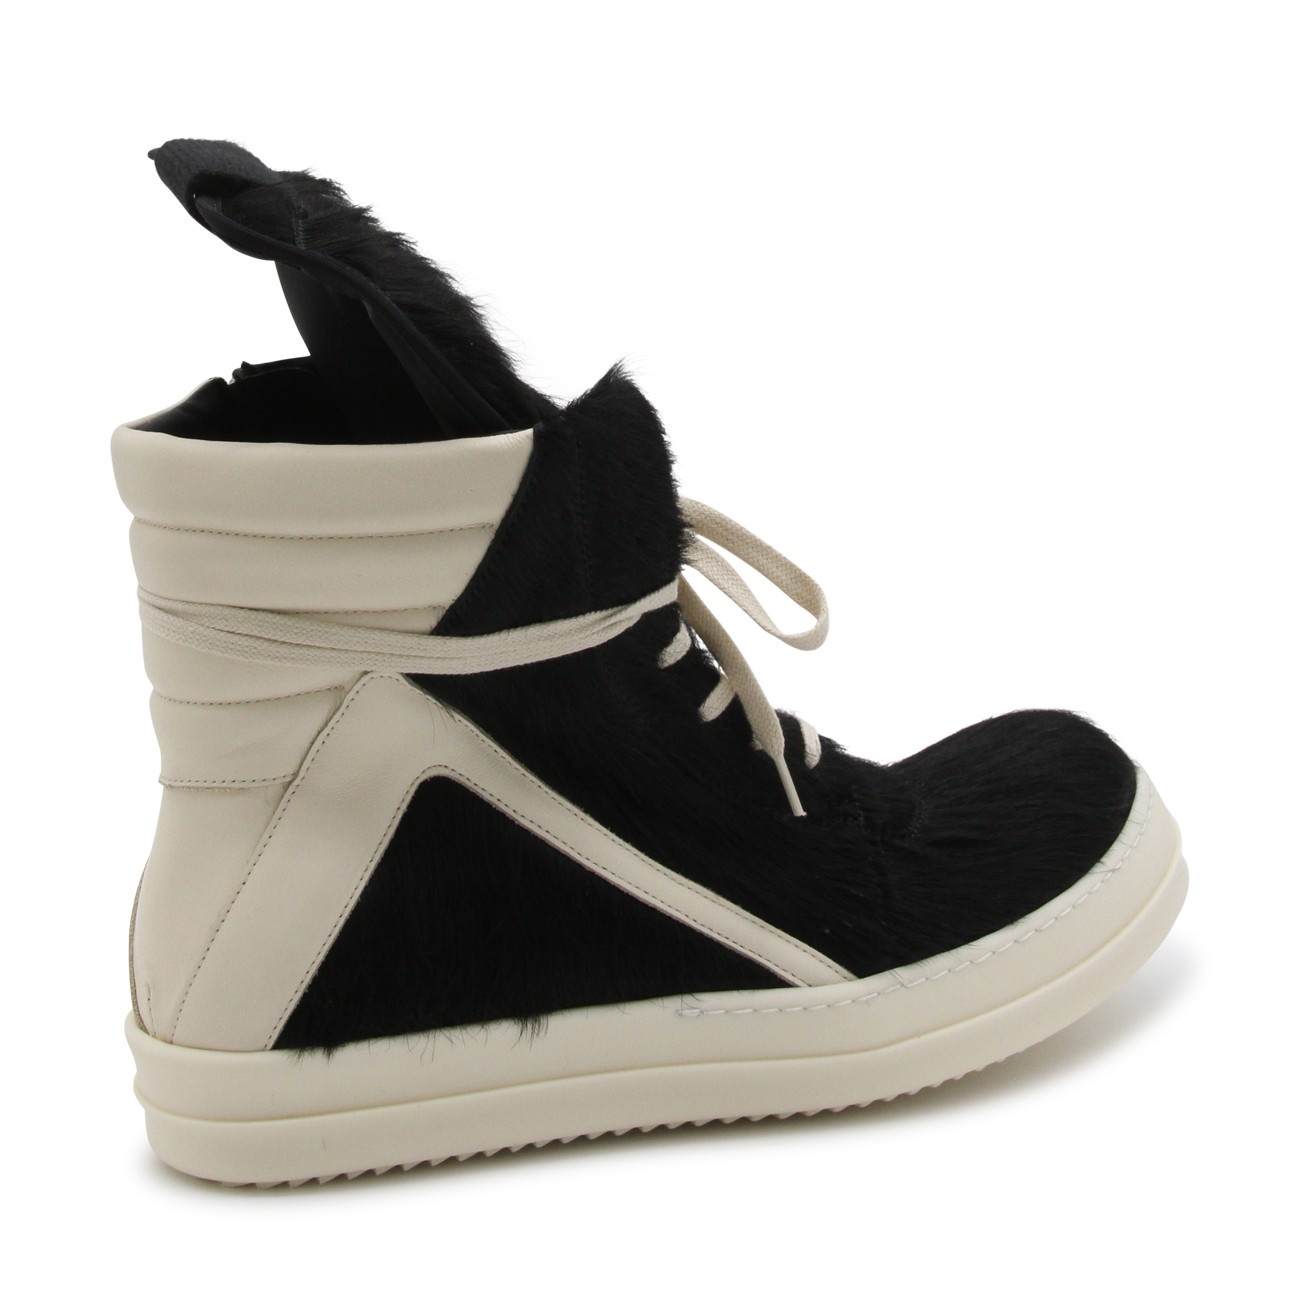 black and white leather geobasket sneakers - 3